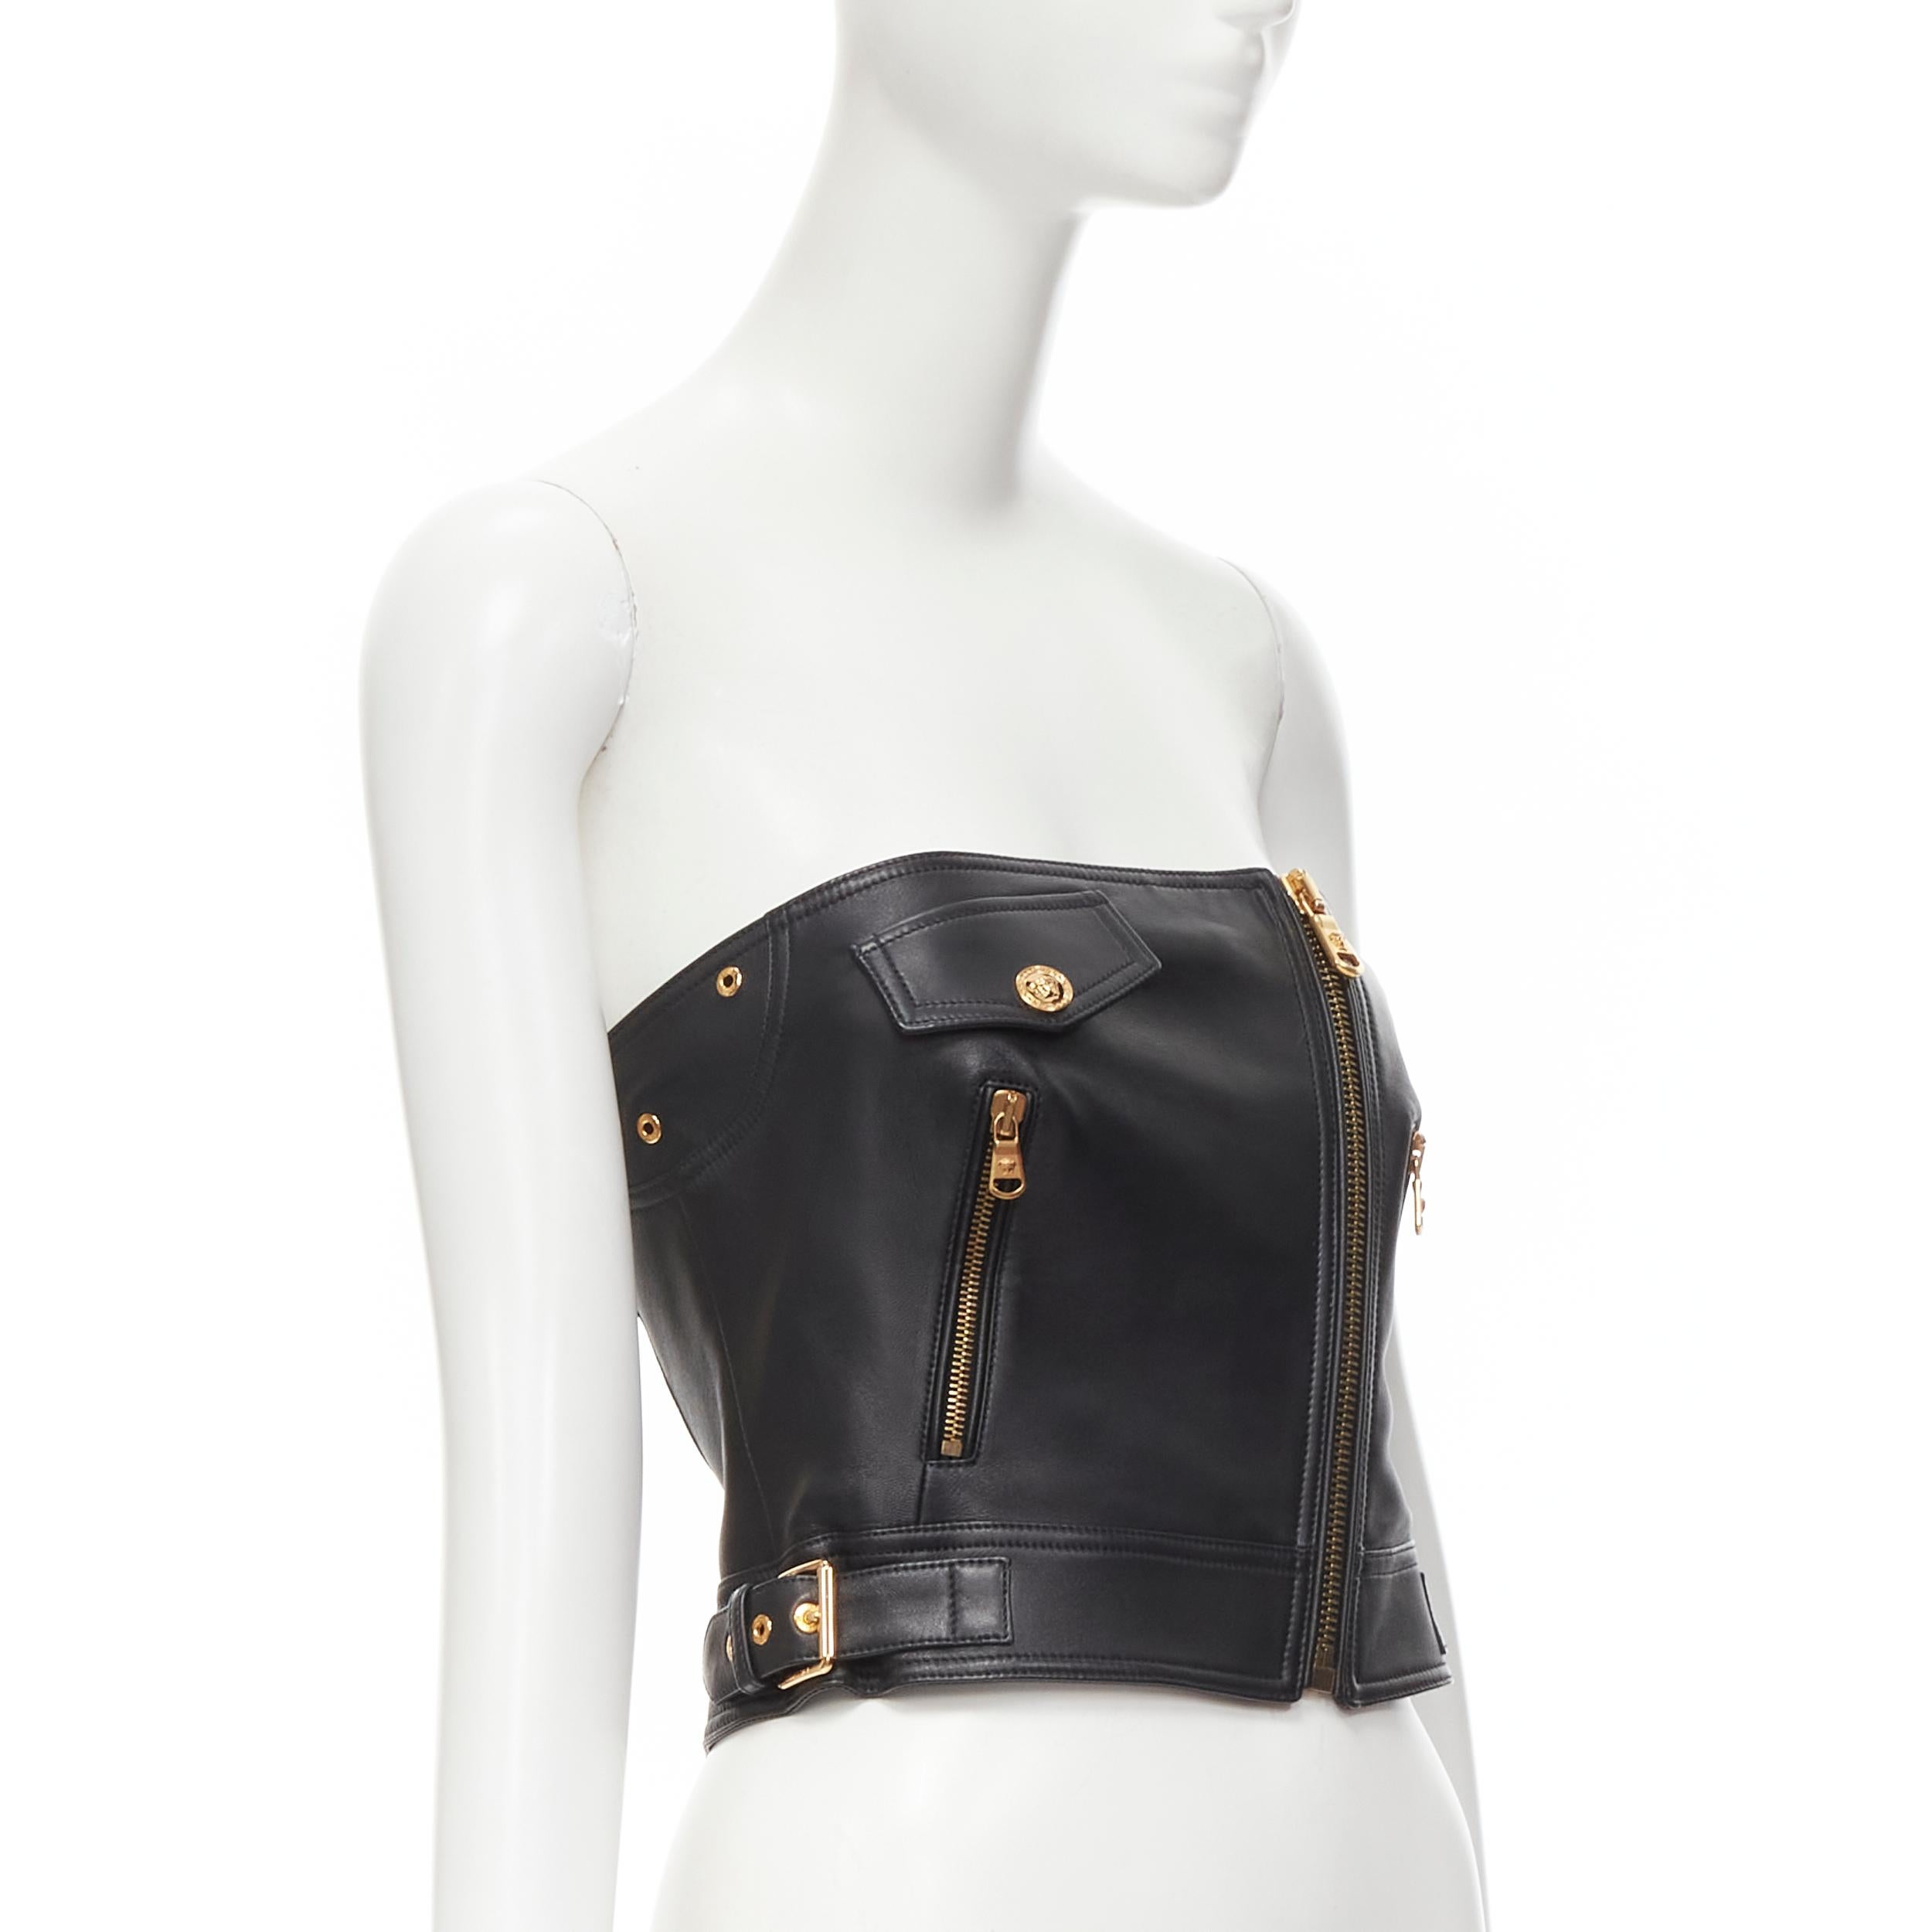 new VERSACE Runway black leather gold-tone Medusa biker bustier top IT38 XS
Reference: TGAS/C00017
Brand: Versace
Designer: Donatella Versace
Material: Leather
Color: Black
Pattern: Solid
Closure: Zip
Extra Detail: Genuine black leather. Gold-tone